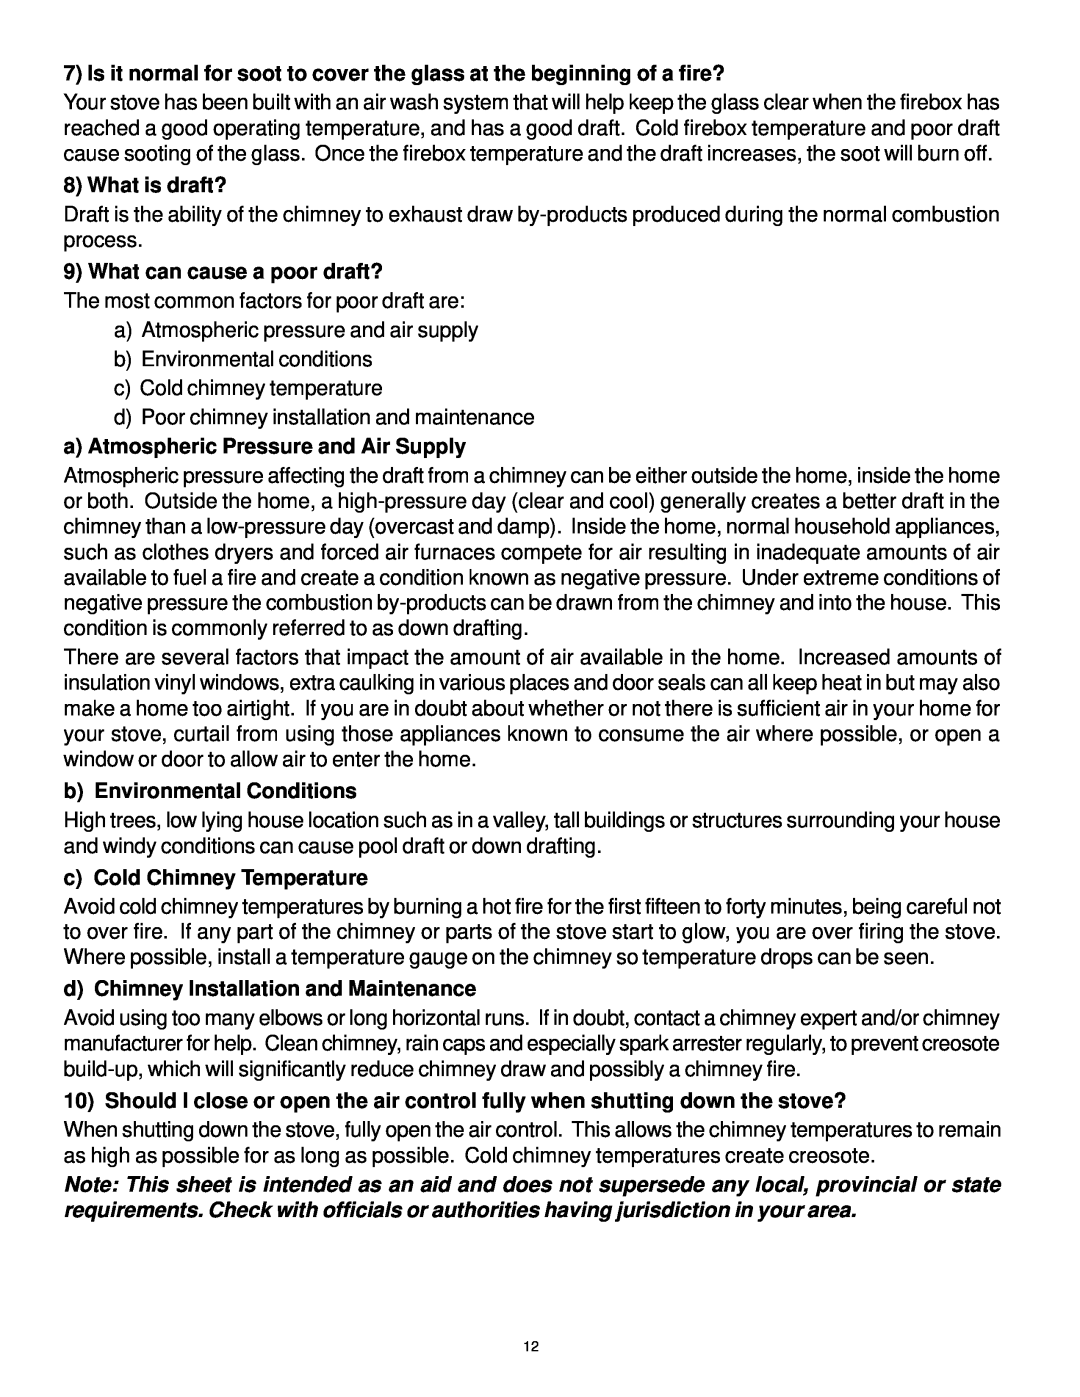 Vermont Casting WOOD STOVE owner manual What is draft?, What can cause a poor draft?, aAtmospheric Pressure and Air Supply 